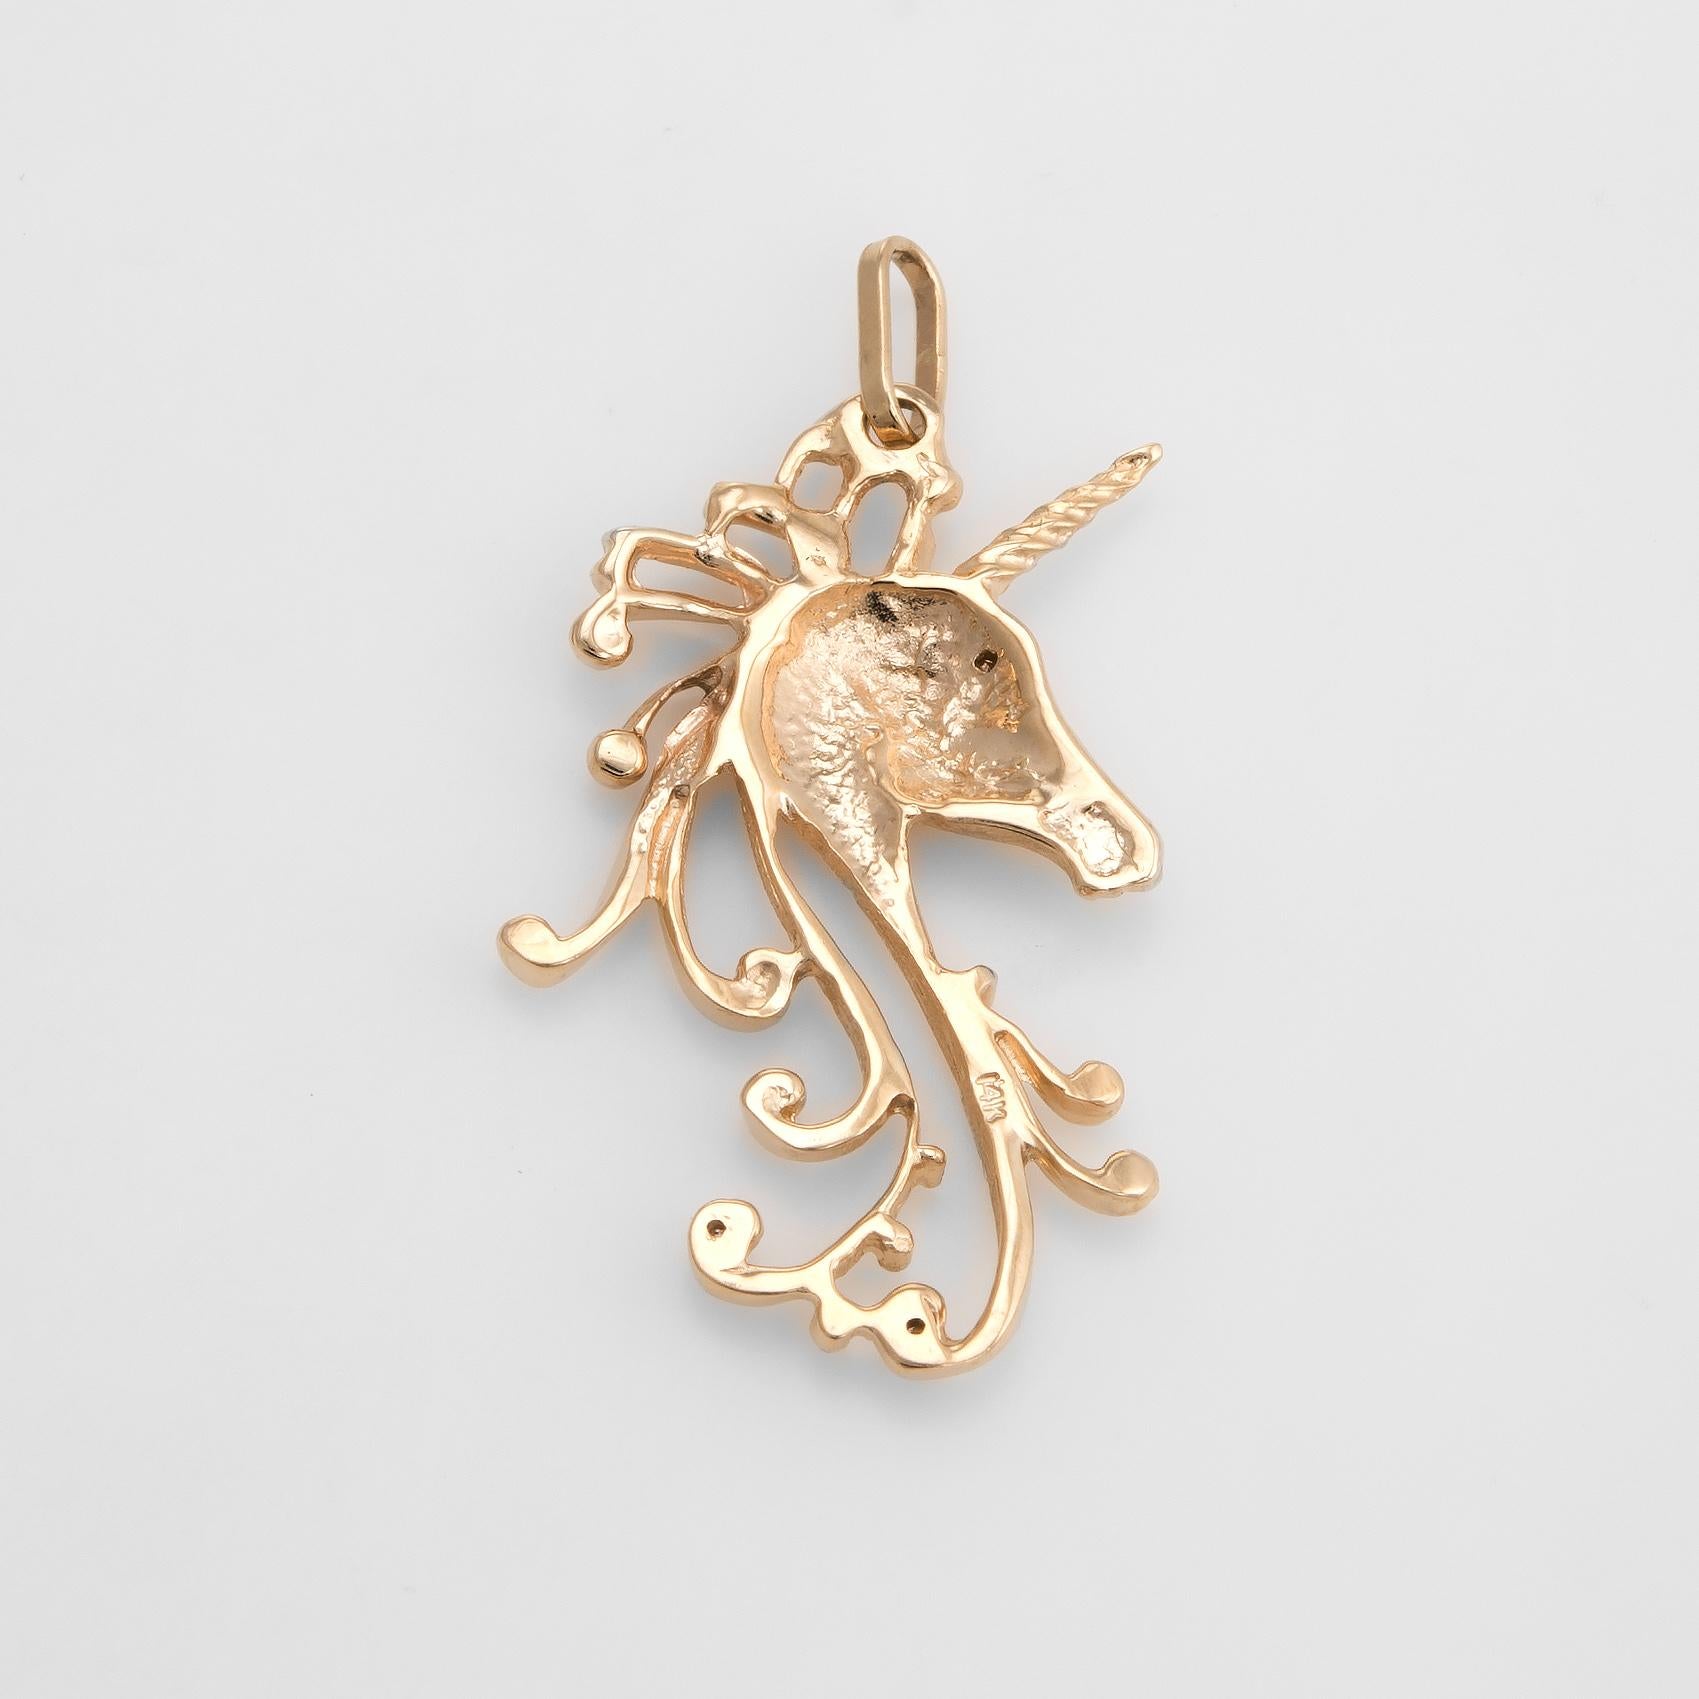 Finely detailed unicorn pendant, crafted in 14 karat yellow gold. 

Single cut diamond is estimated at 0.01 carats (estimated at H-I color and SI1 clarity). 

The pendant is in excellent original condition. 

Particulars:

Weight: 4 grams

Stones: 